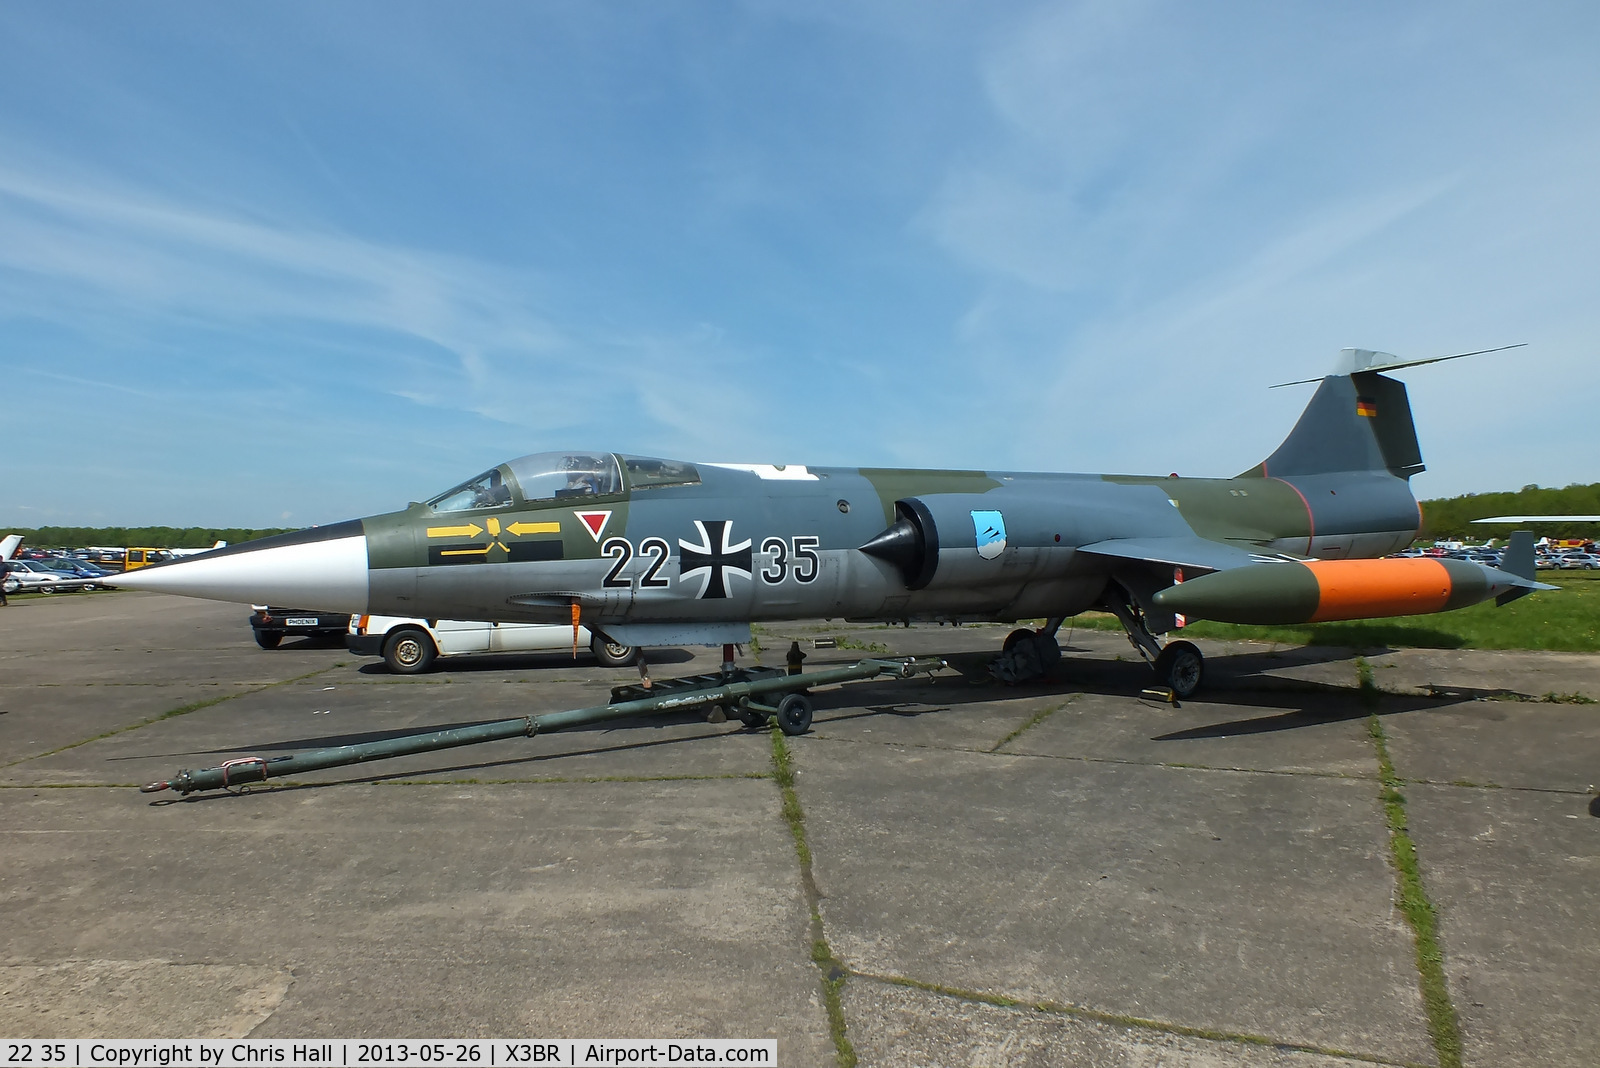 22 35, Lockheed F-104G Starfighter C/N 683-7113, at the Cold War Jets open day, Bruntingthorpe